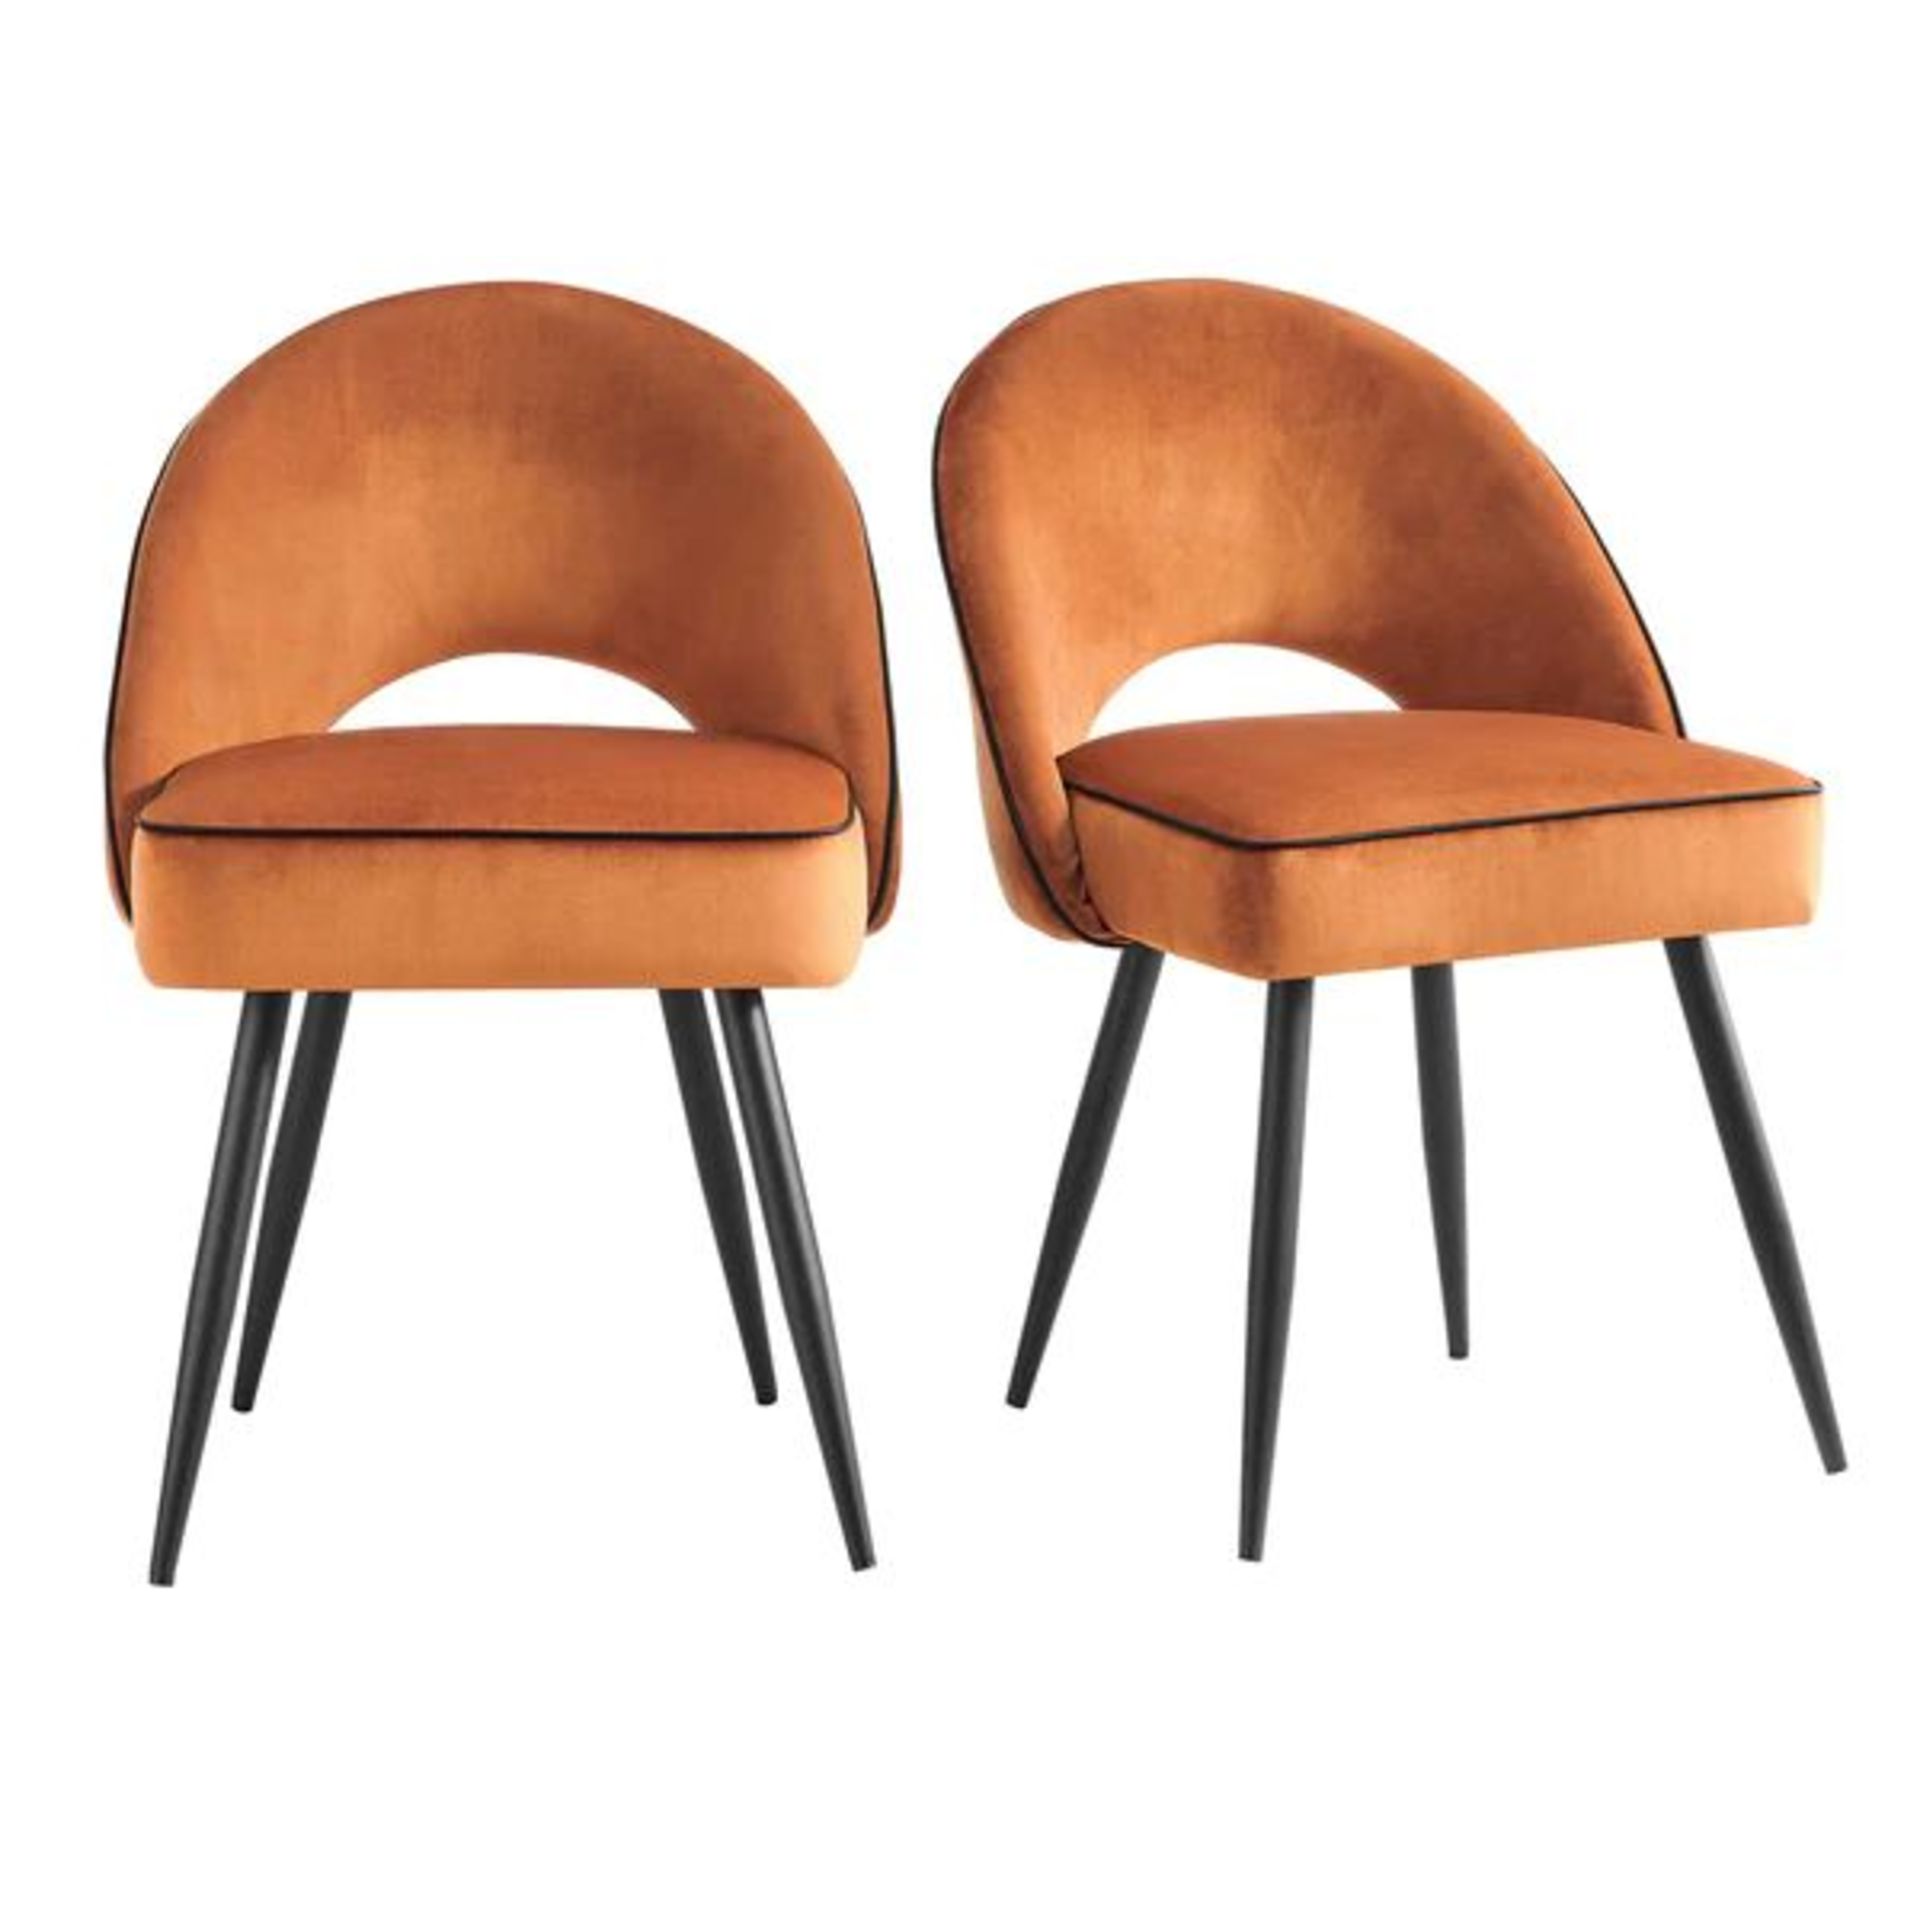 Oakley Set of 2 Orange Velvet Upholstered Dining Chairs with Contrast Piping. - ER31. RRP £279.99. - Bild 2 aus 2